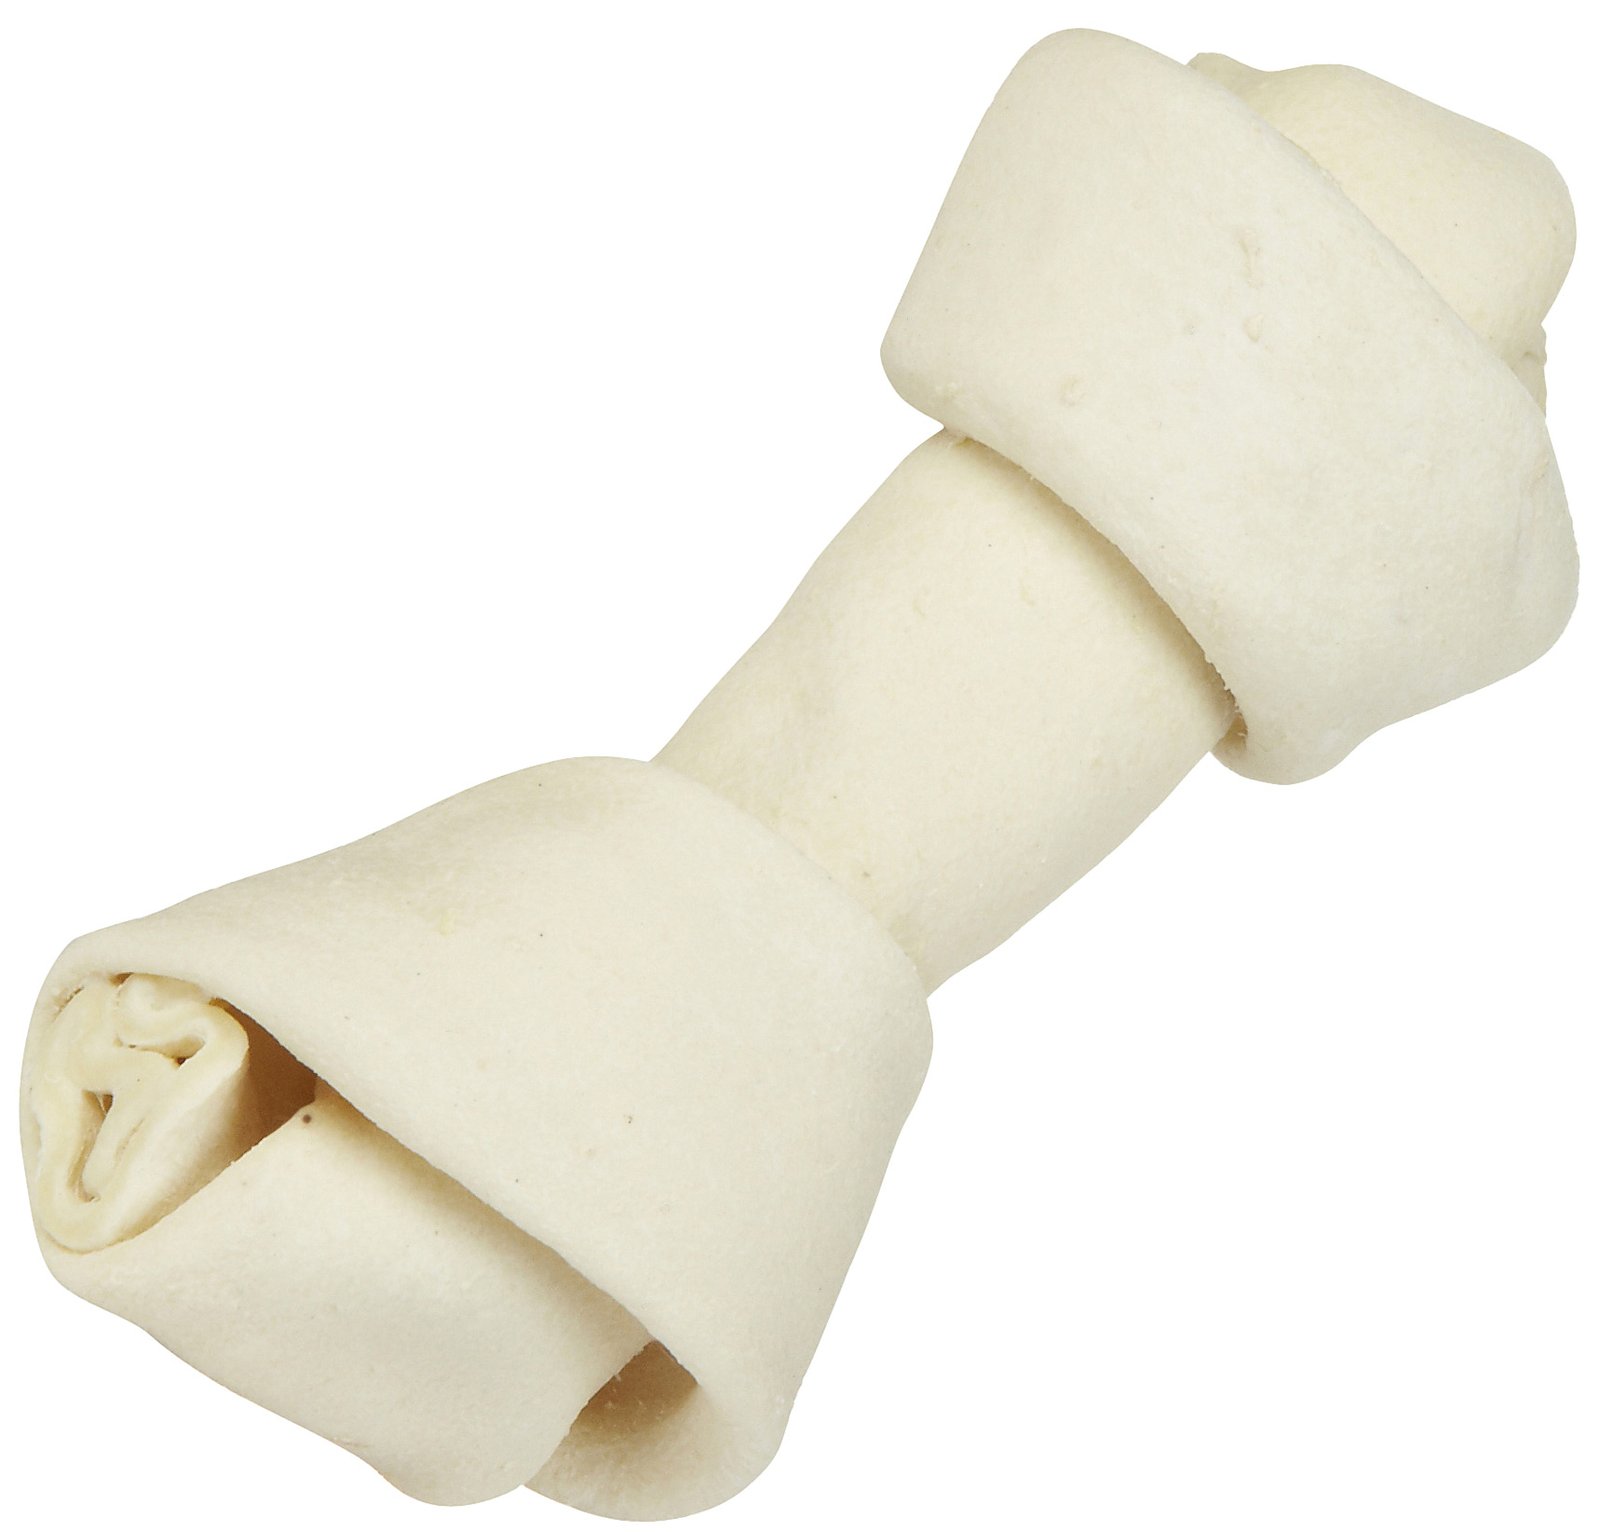 RAW HIDE KNOTTED BONE